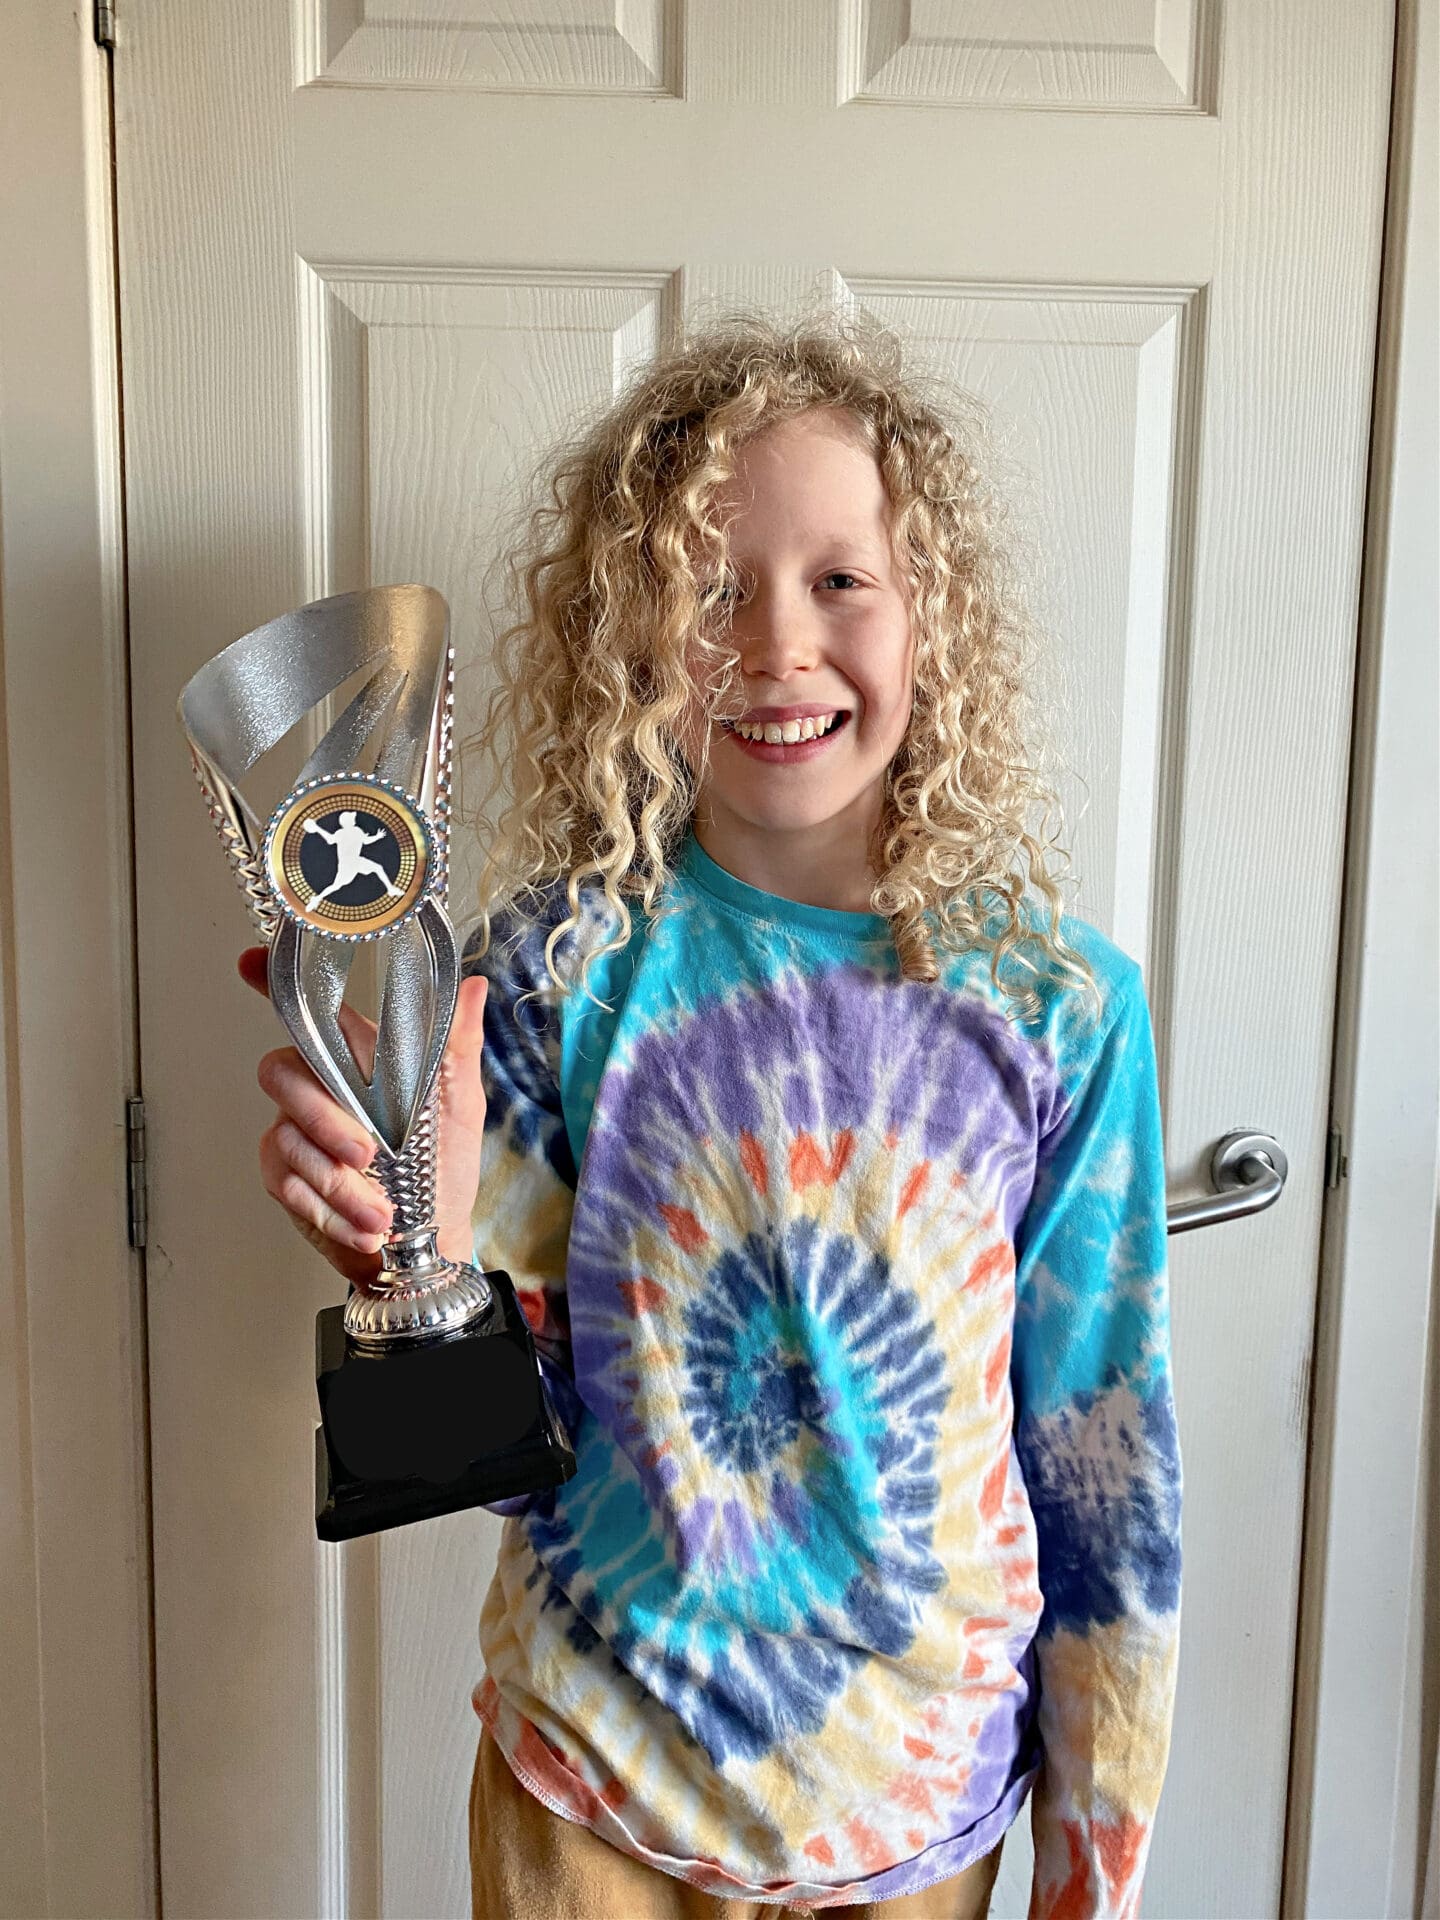 Child with trophy